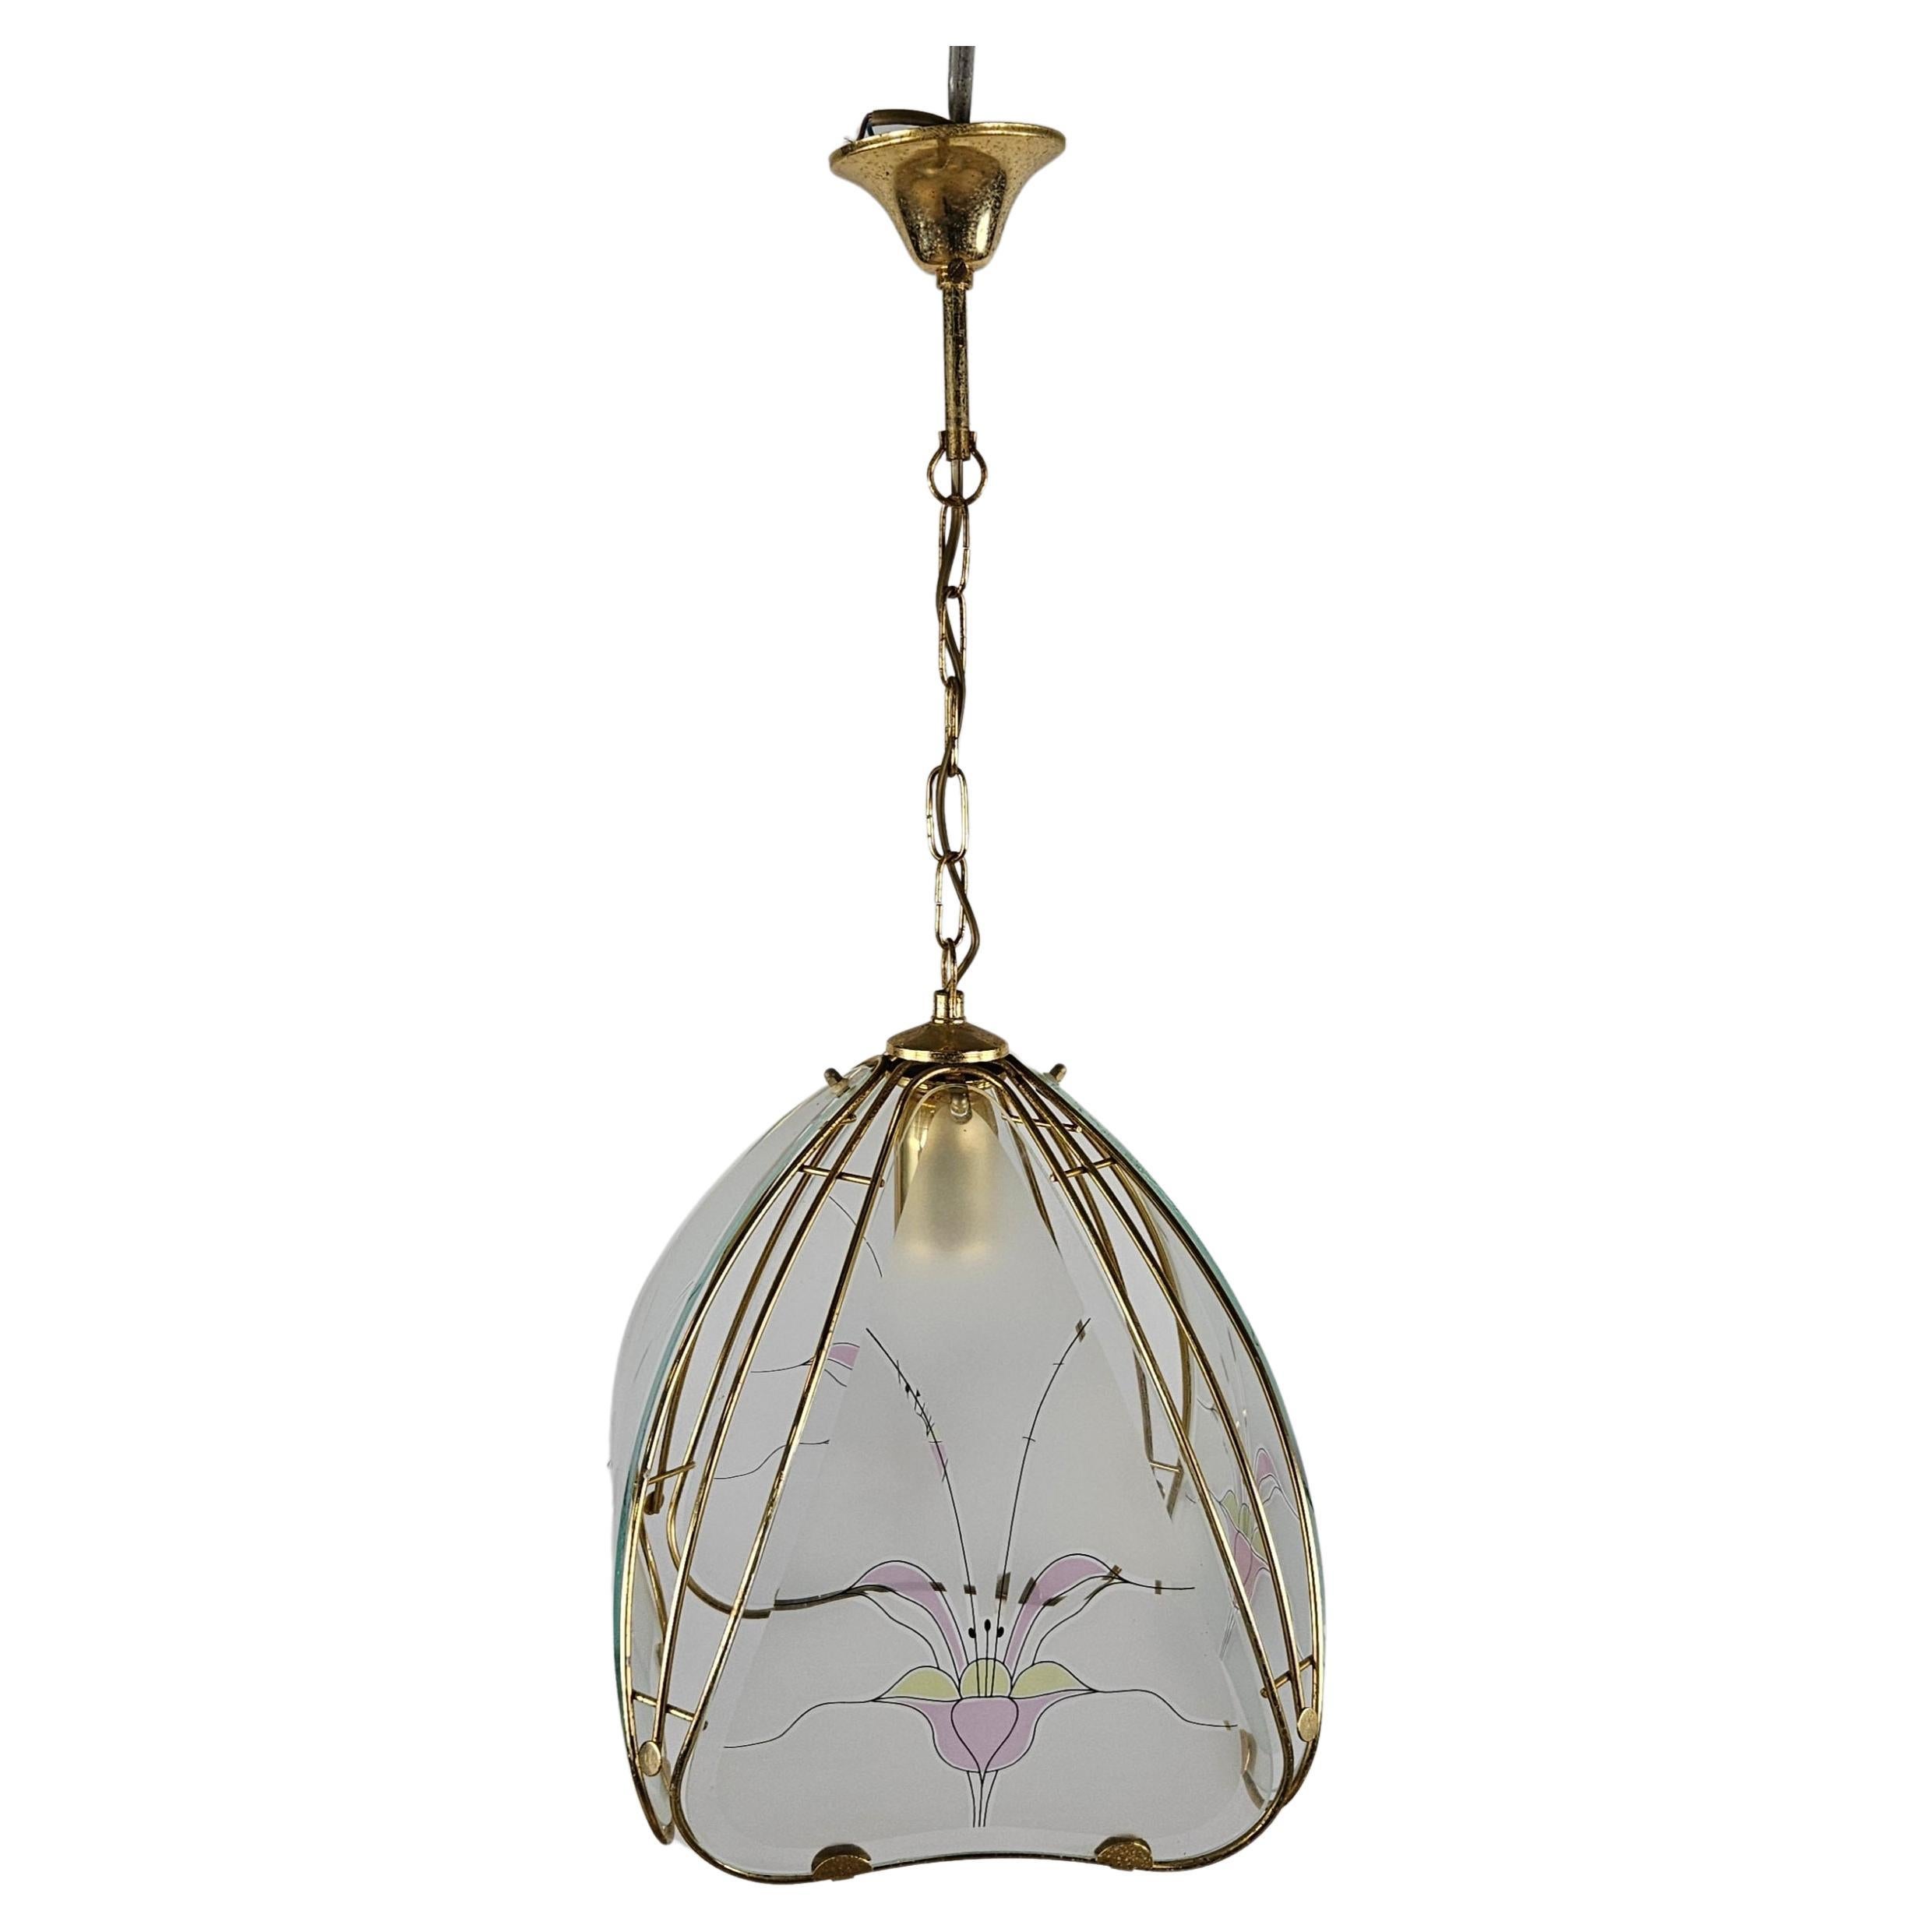 Brass and frosted glass chandelier with floral decoration 20th century